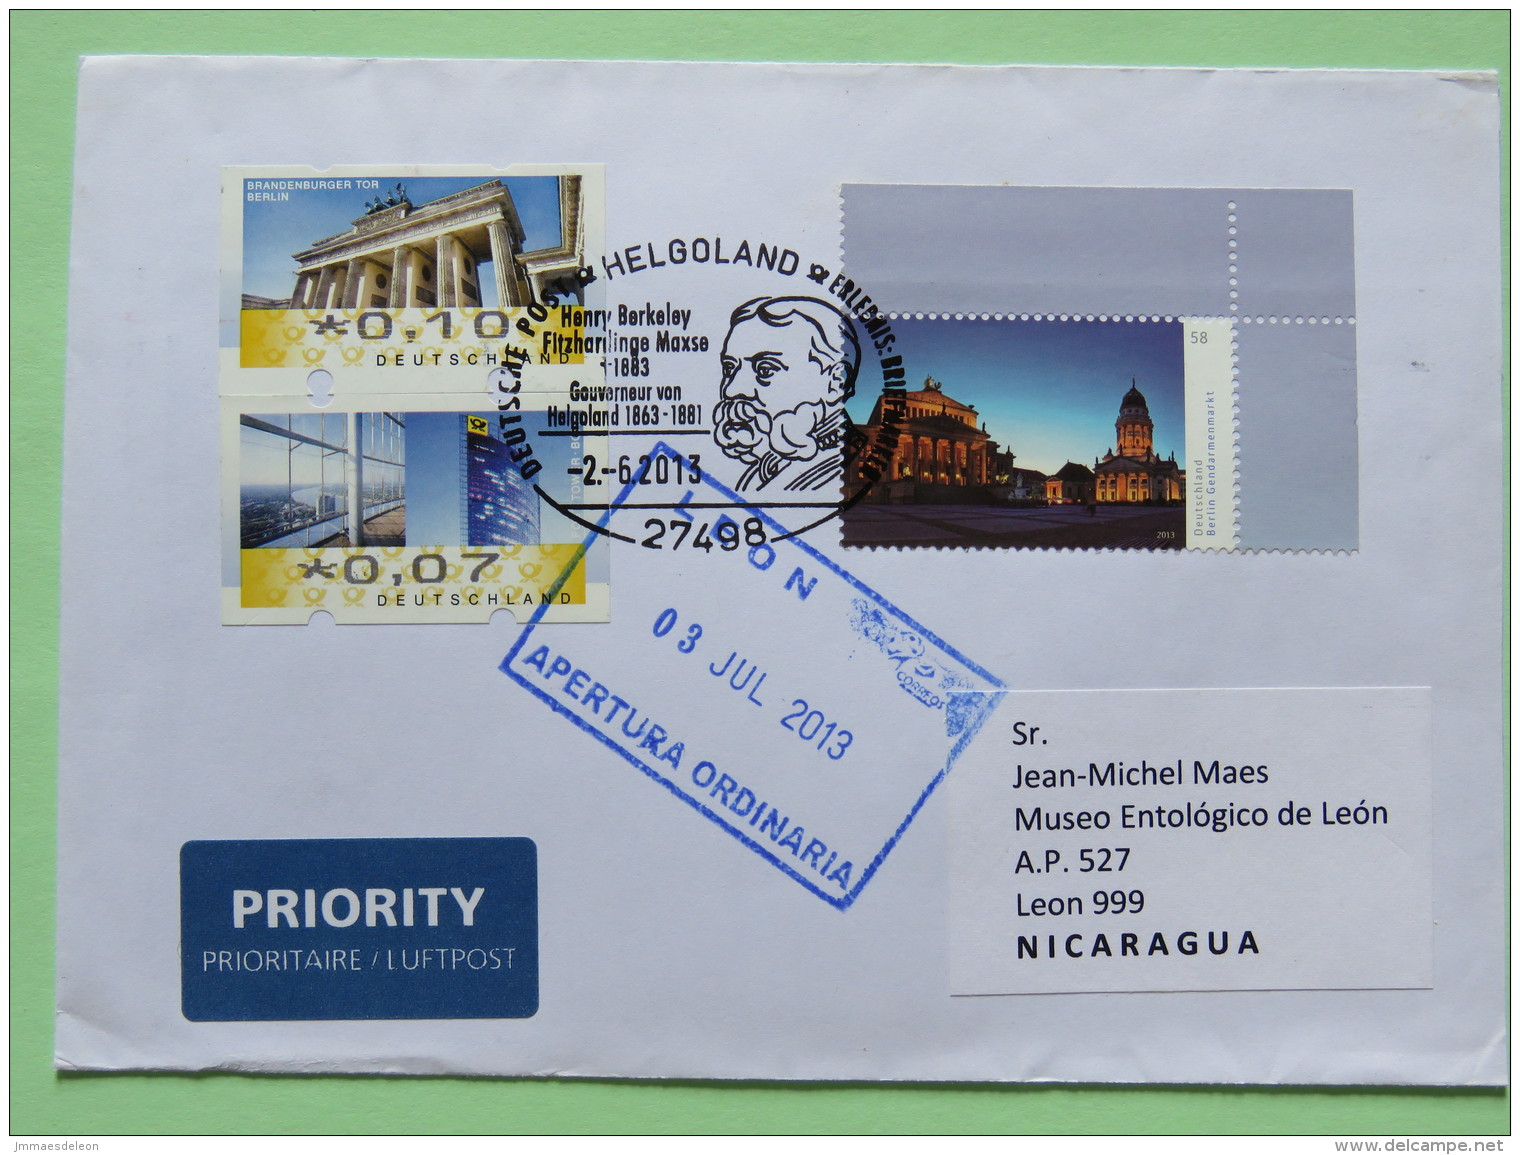 Germany 2013 Special Cancel Helgoland On Cover To Nicaragua - Church - Franking Labels - Brandenburg Door - Covers & Documents